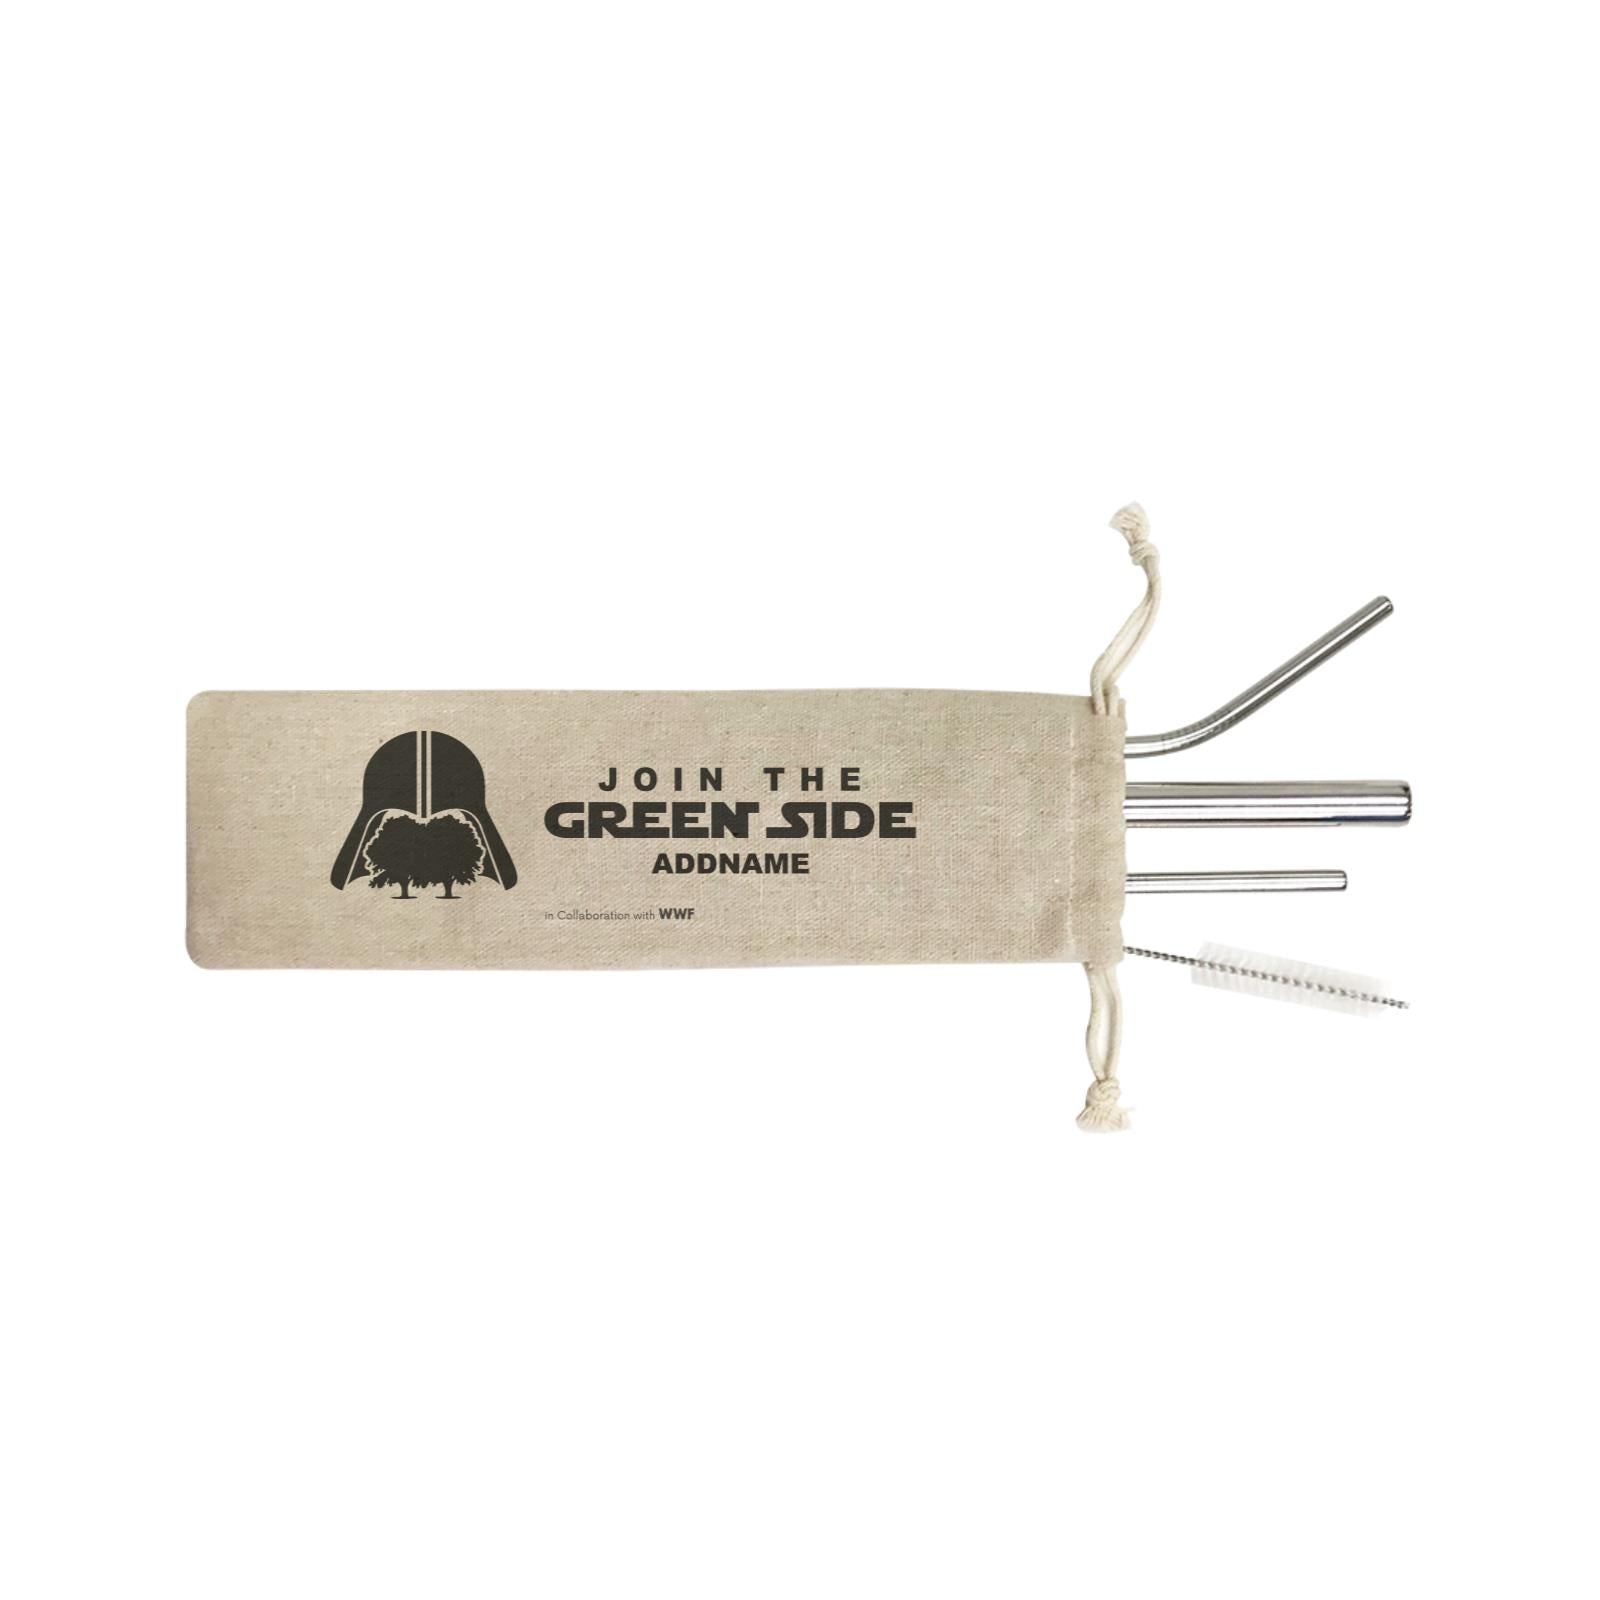 Join The Green Side Addname SB 4-In-1 Stainless Steel Straw Set in Satchel